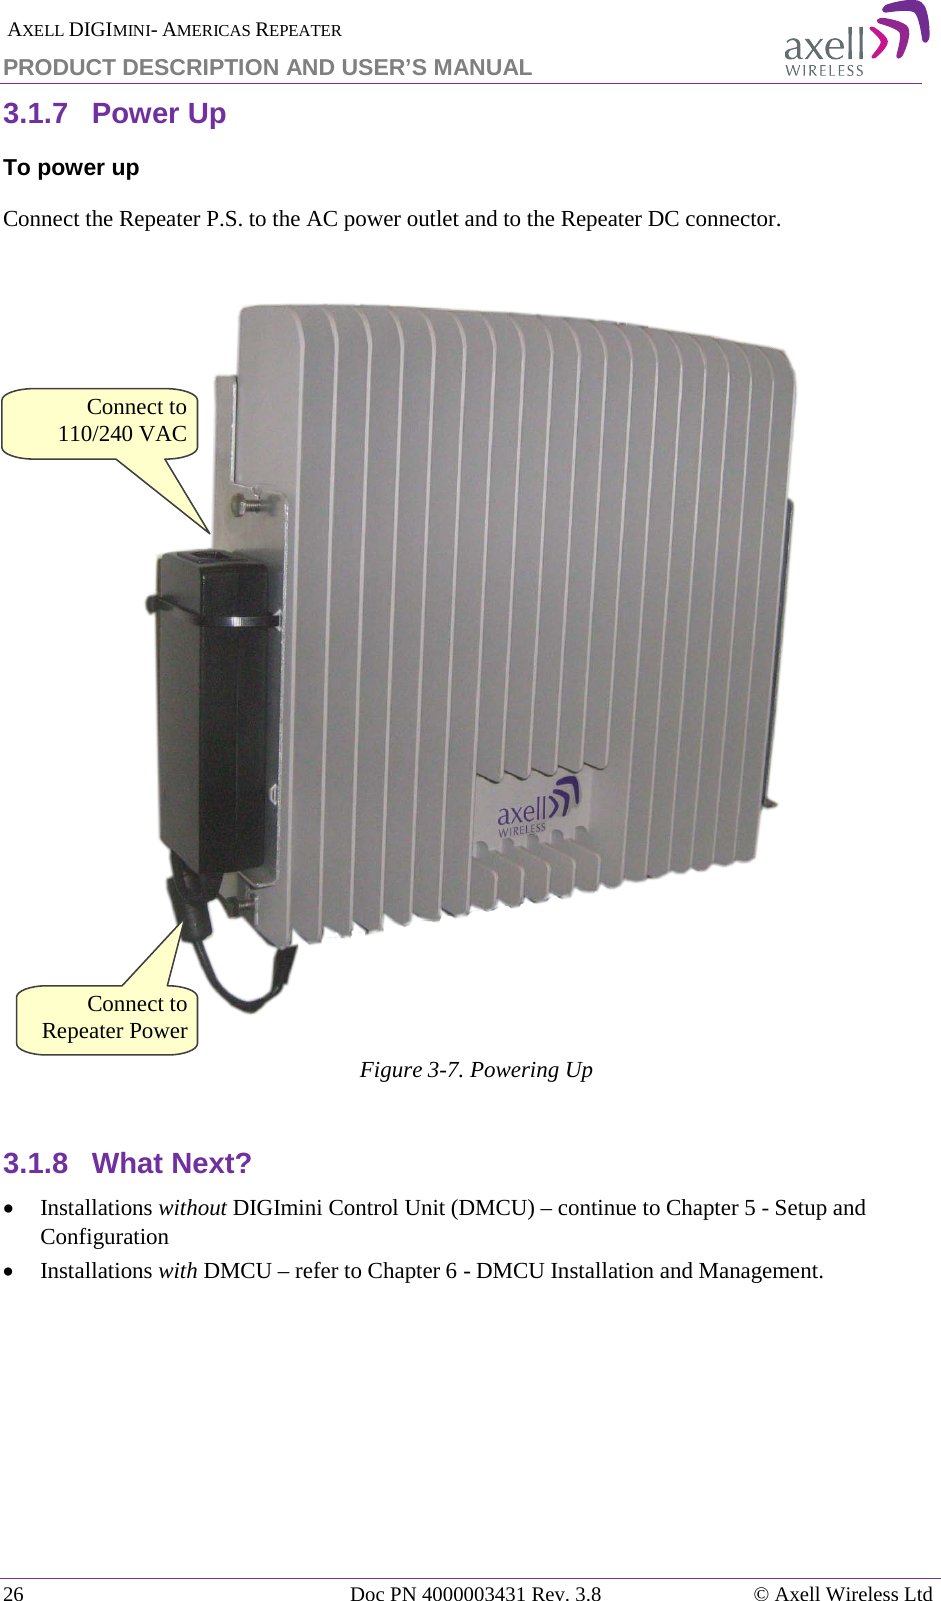  AXELL DIGIMINI- AMERICAS REPEATER PRODUCT DESCRIPTION AND USER’S MANUAL 26   Doc PN 4000003431 Rev. 3.8 © Axell Wireless Ltd 3.1.7  Power Up To power up Connect the Repeater P.S. to the AC power outlet and to the Repeater DC connector.    Figure  3-7. Powering Up  3.1.8  What Next? • Installations without DIGImini Control Unit (DMCU) – continue to Chapter  5 - Setup and Configuration  • Installations with DMCU – refer to Chapter  6 - DMCU Installation and Management.    Connect to Repeater Power Connect to 110/240 VAC 